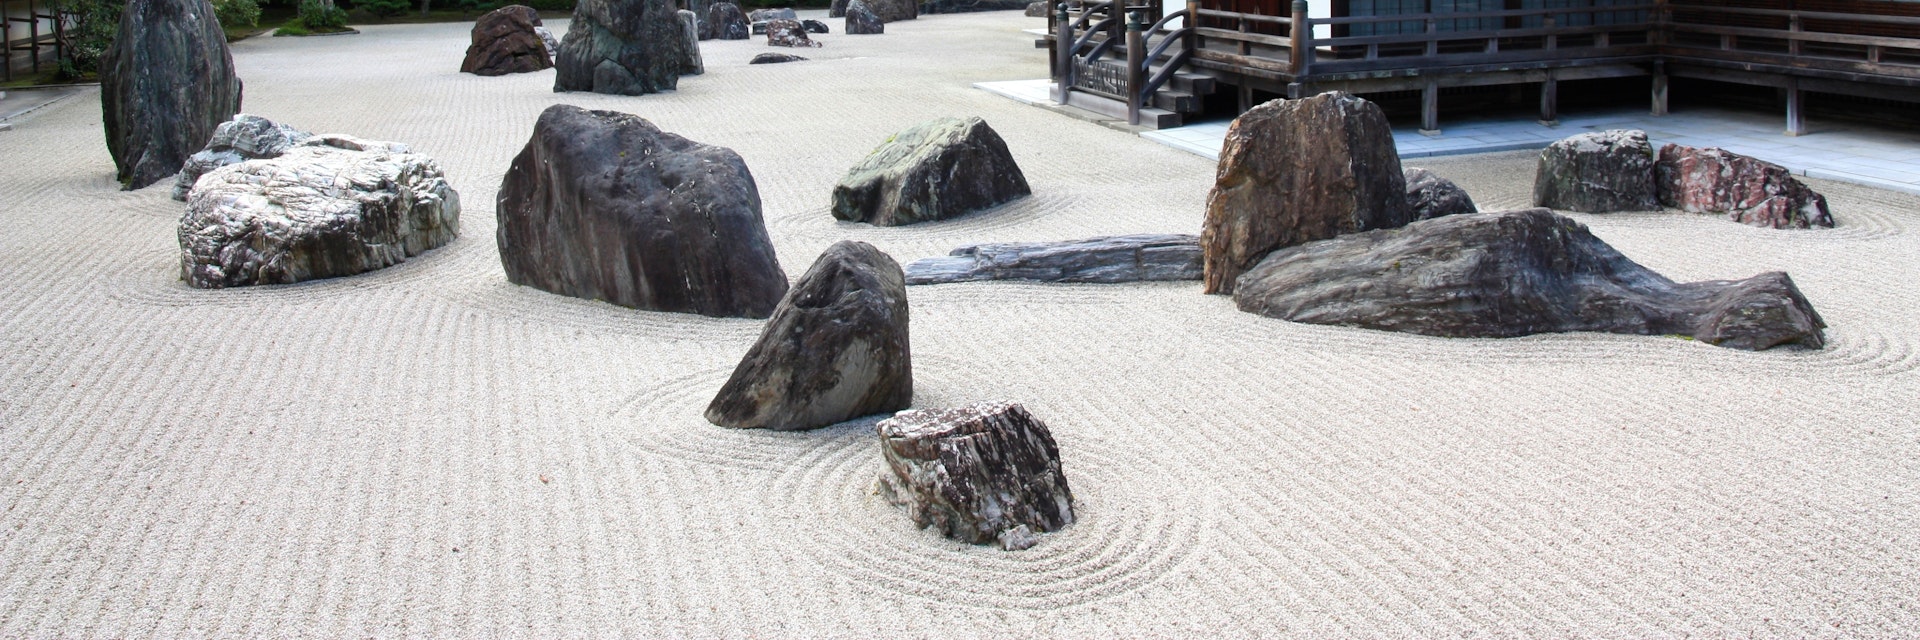 A view of the zen garden of the Kongobuji temple, Koyasan, Japan; Shutterstock ID 59794360; Your name (First / Last): Laura Crawford; GL account no.: 65050; Netsuite department name: Online Editorial; Full Product or Project name including edition: Kii Peninsula page online images for BiT